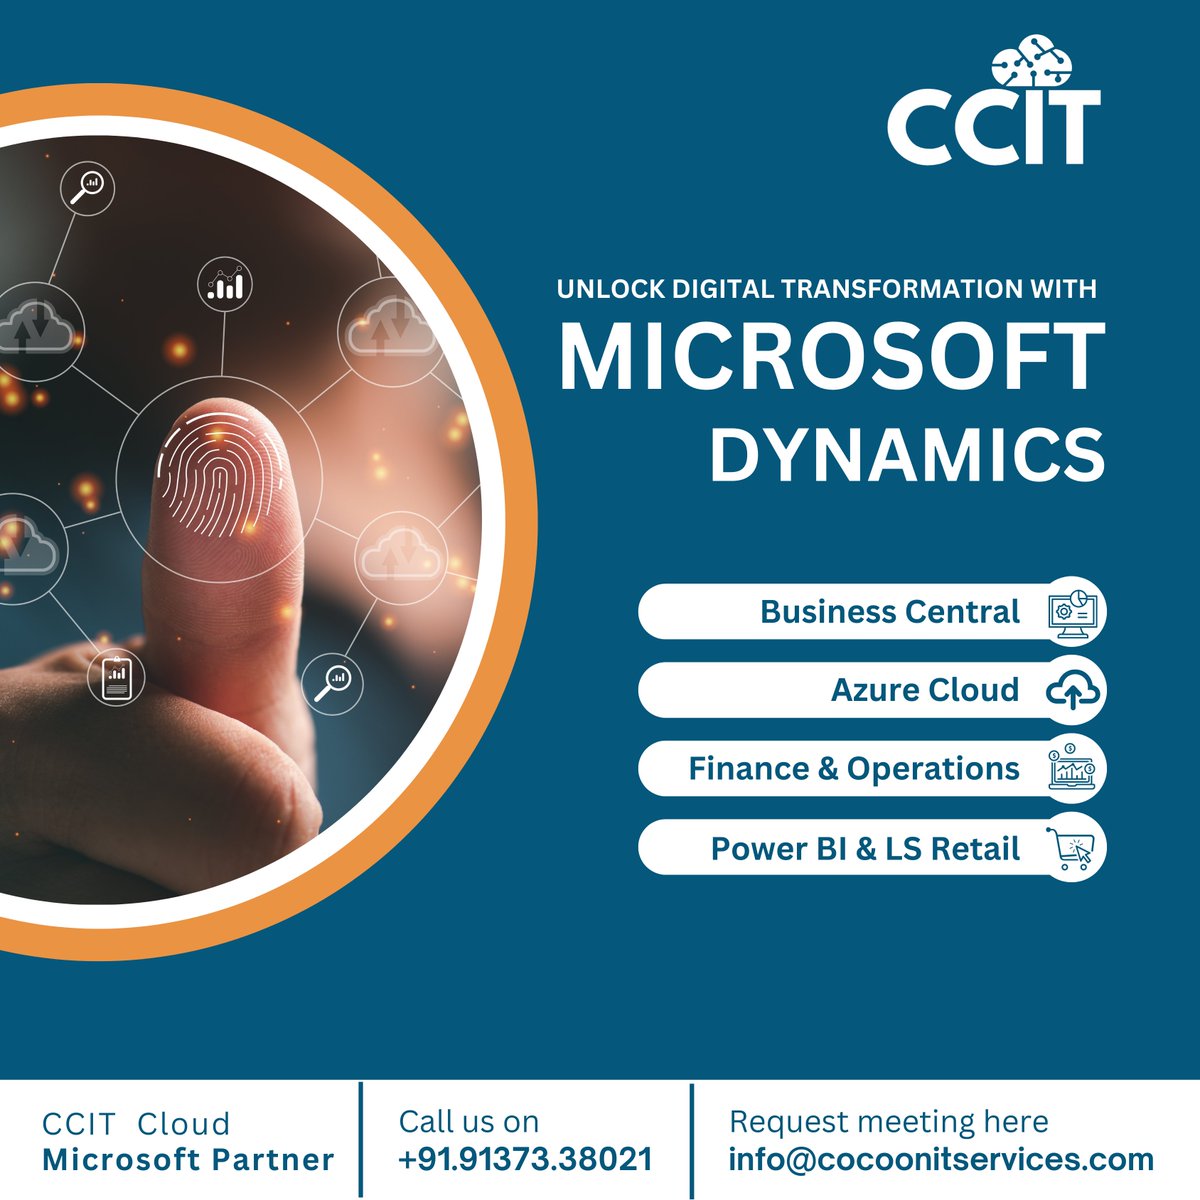 Unlock your business's full potential with Microsoft Dynamics solutions from CCIT, a Microsoft Cloud Partner. Our expertise helps you with . Streamline operations . Enhance customer experiences . Optimize sales & marketing . Gain data-driven insights #MicrosoftDynamics #ccit